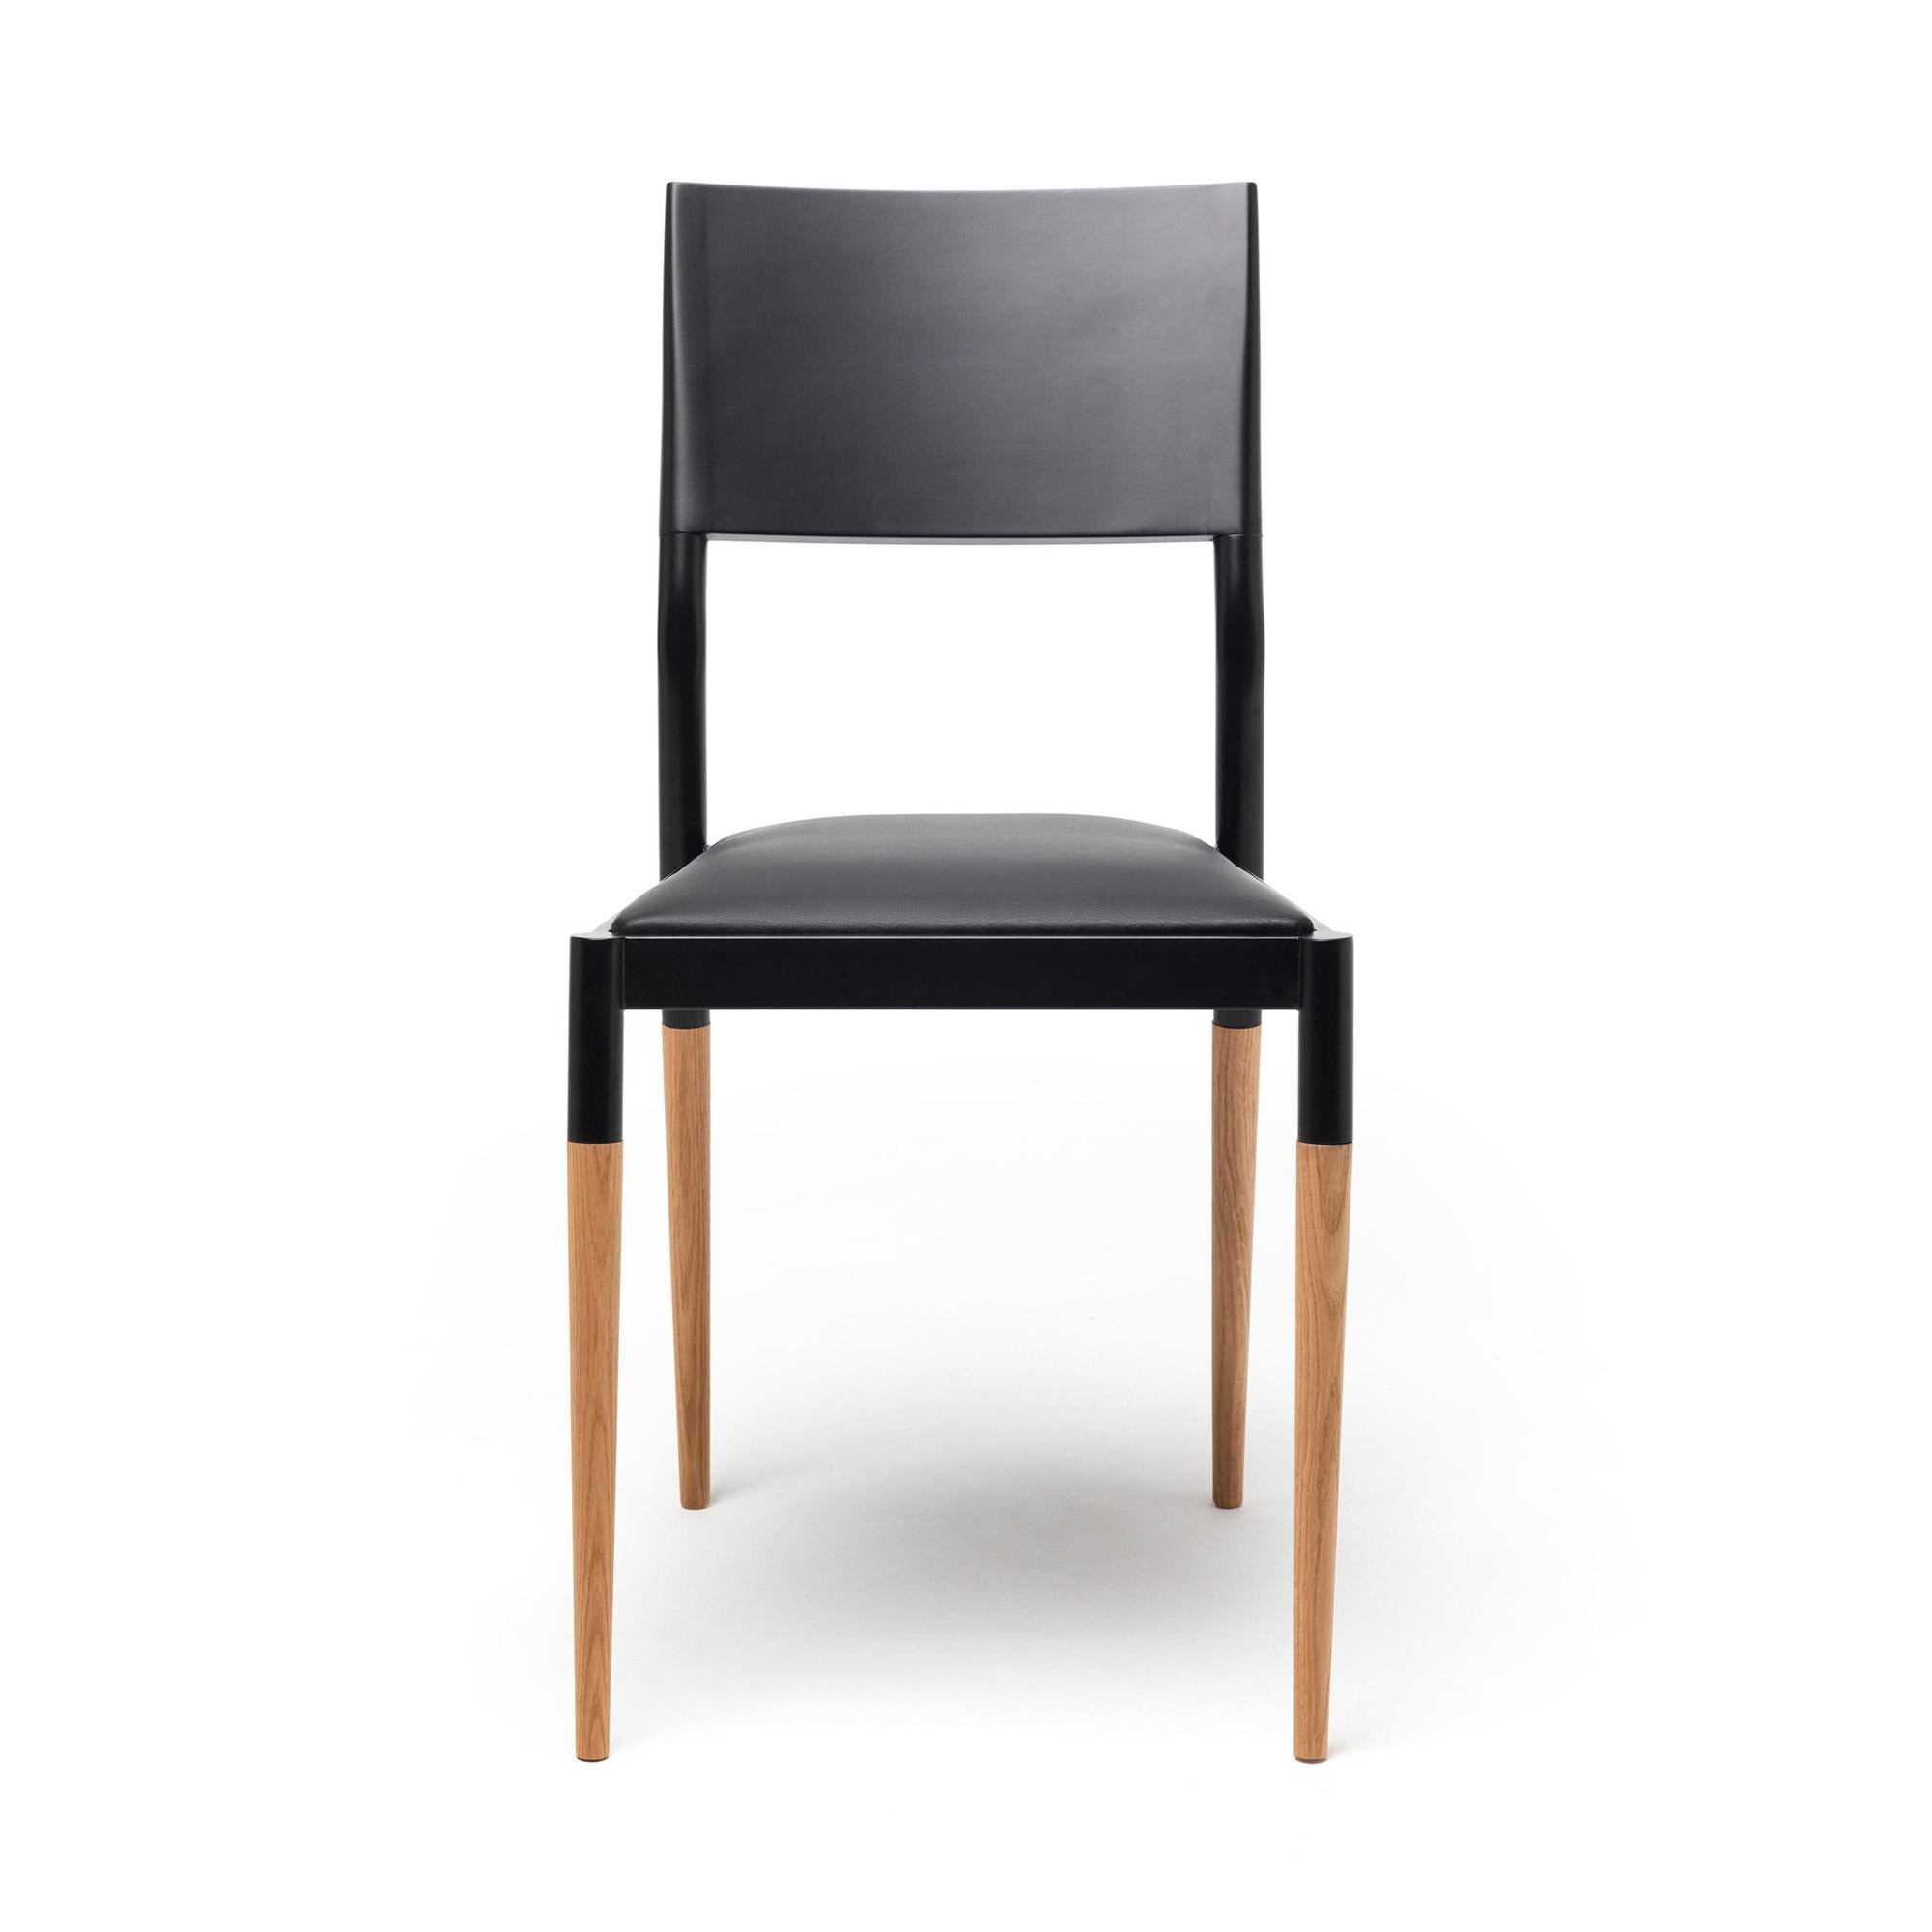 Turned 21st Century Modern Steel And Wood Chair With Leather Upholstered Seat For Sale